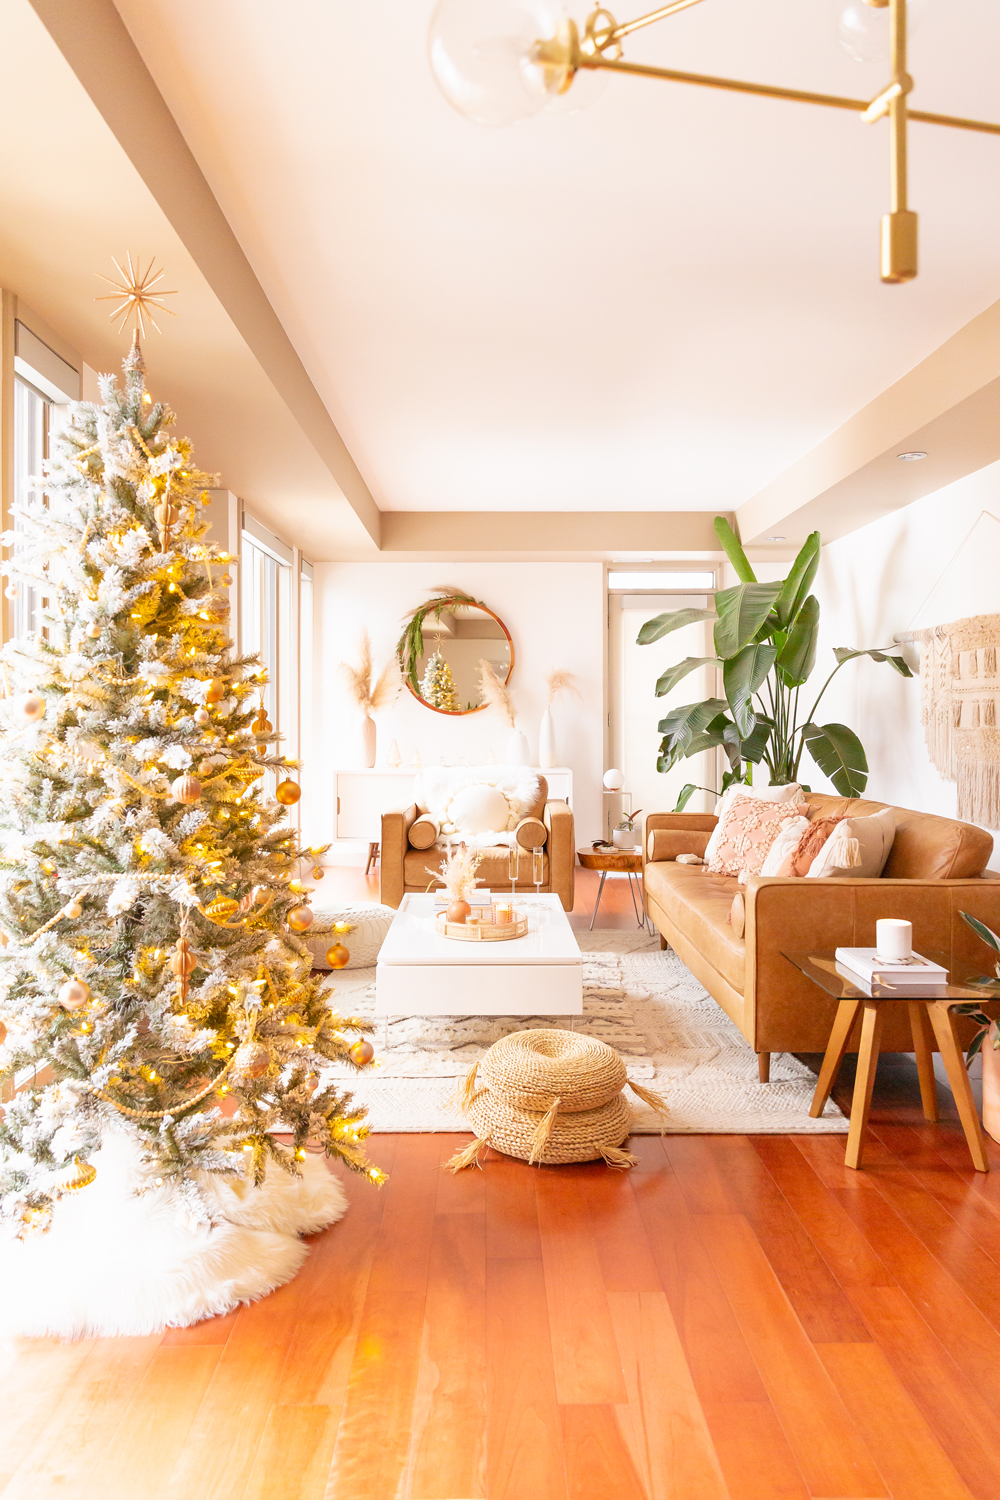 Mid Century Meets Boho Holiday Decor 2021 | Bright & airy Mid Century Modern Living Room with a Flocked Christmas Tree and Sputnik Metallic Tree Topper | Eucalyptus garland with pampas grass and dried orange slices | Boho Christmas Decorating Ideas for Apartments | Flocked Christmas Tree with Wood Garland and Boho Ornaments | Holiday Home Tour | Boho Chic Christmas Decor | Neutral holiday decor | Bird of Paradise Plant Holiday Decor | Boho Christmas Tree // JustineCelina.com